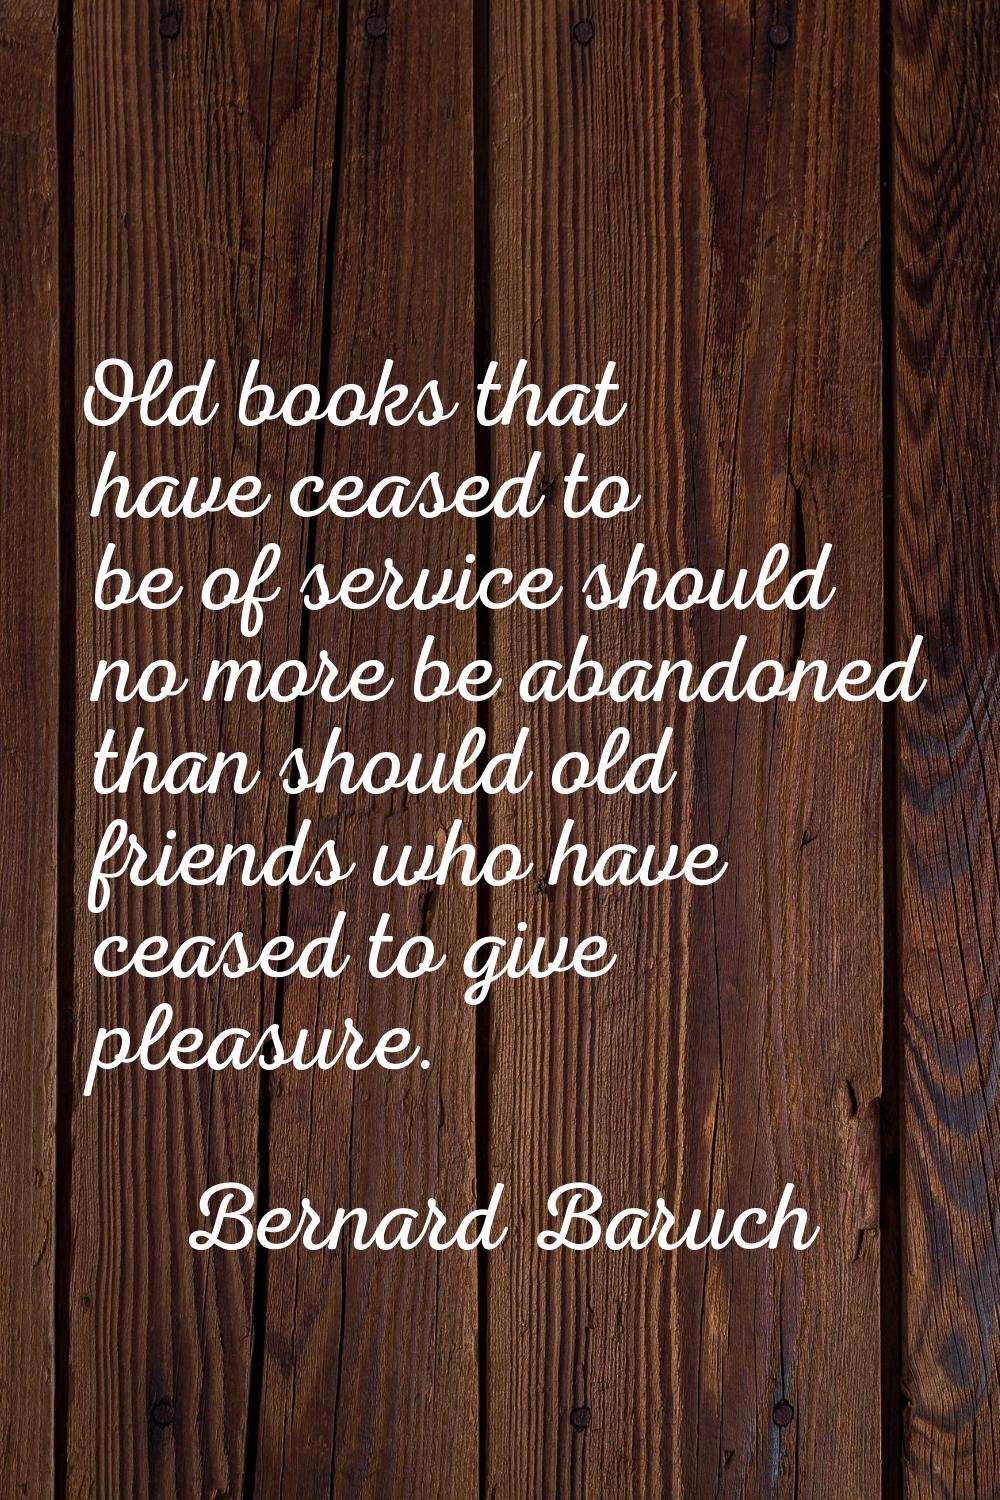 Old books that have ceased to be of service should no more be abandoned than should old friends who